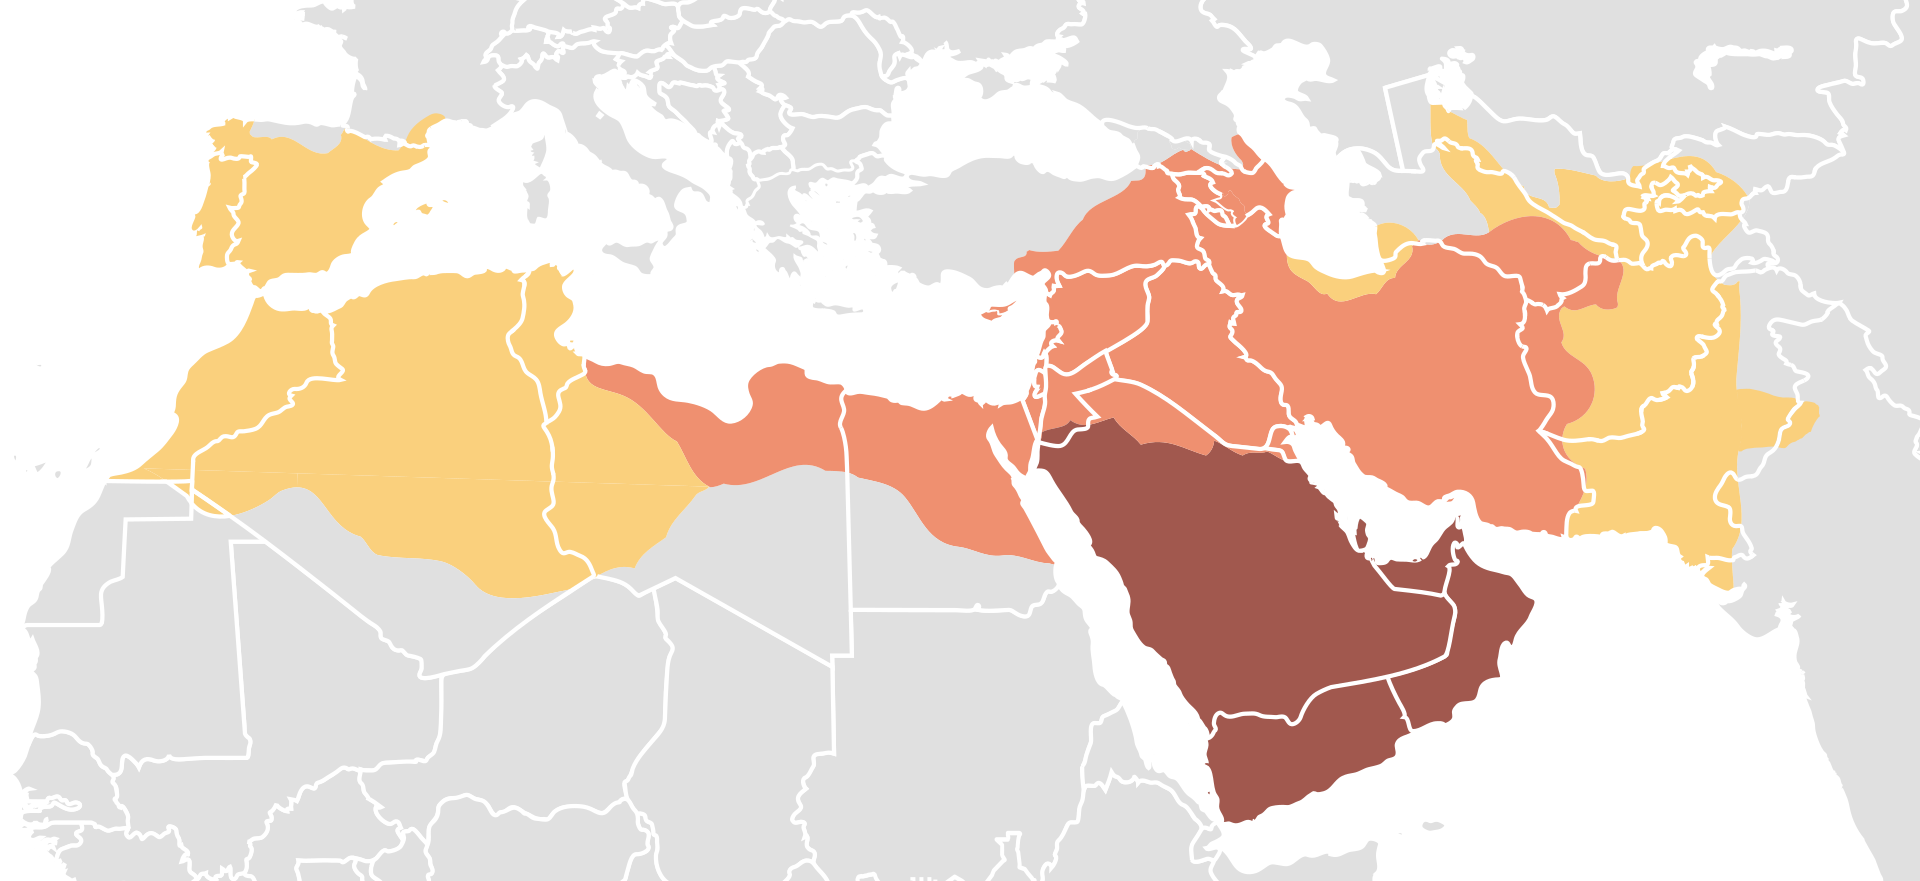 1920px-Map_of_expansion_of_Caliphate.svg.png